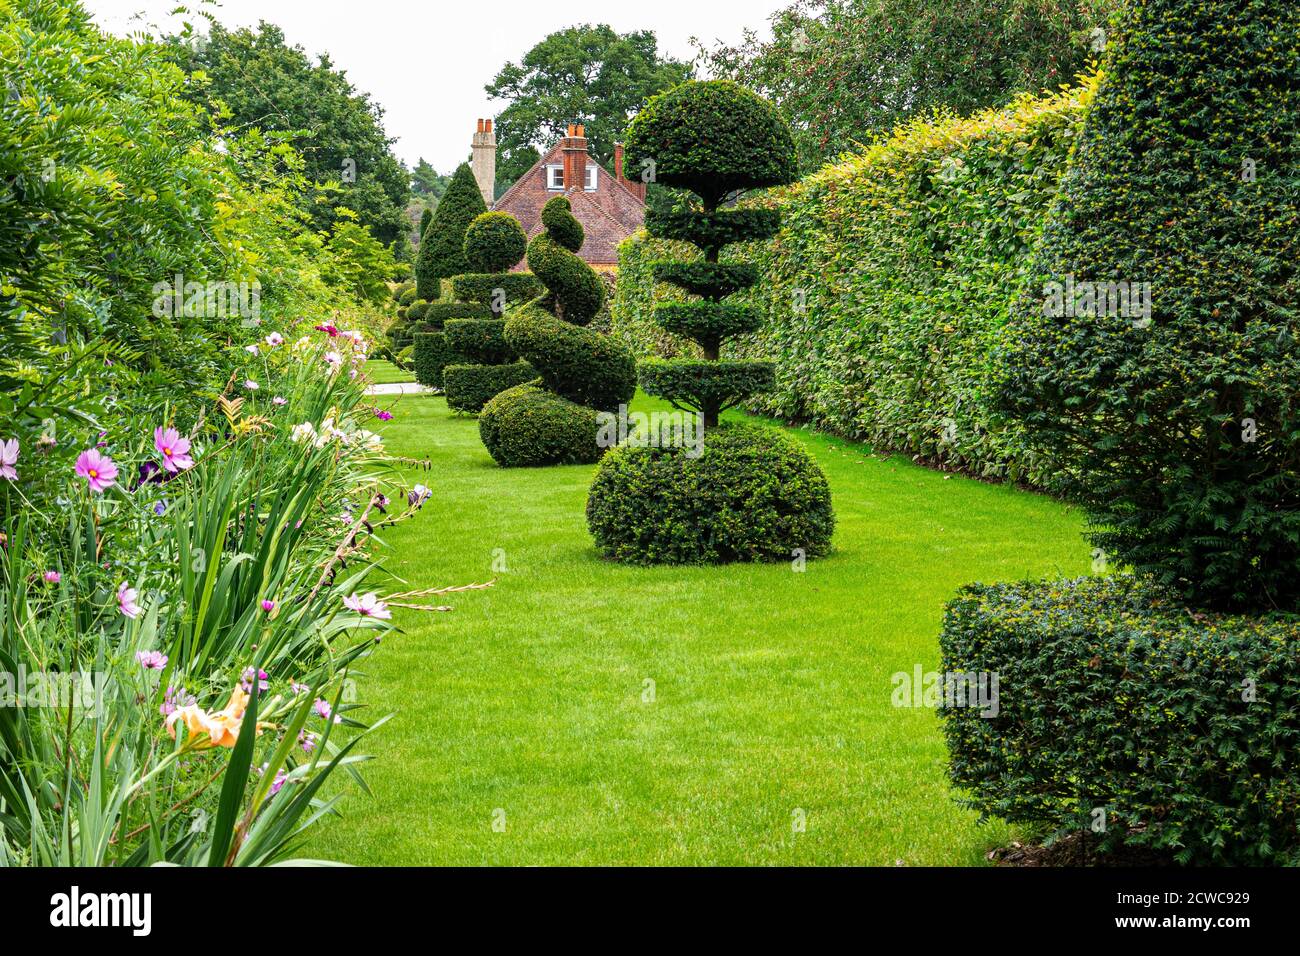 Topiary Avenue Common Yew (taxus baccata) living architecture in a formal garden. Evergreen shrubs & trees into intricate or stylized shapes & forms Stock Photo